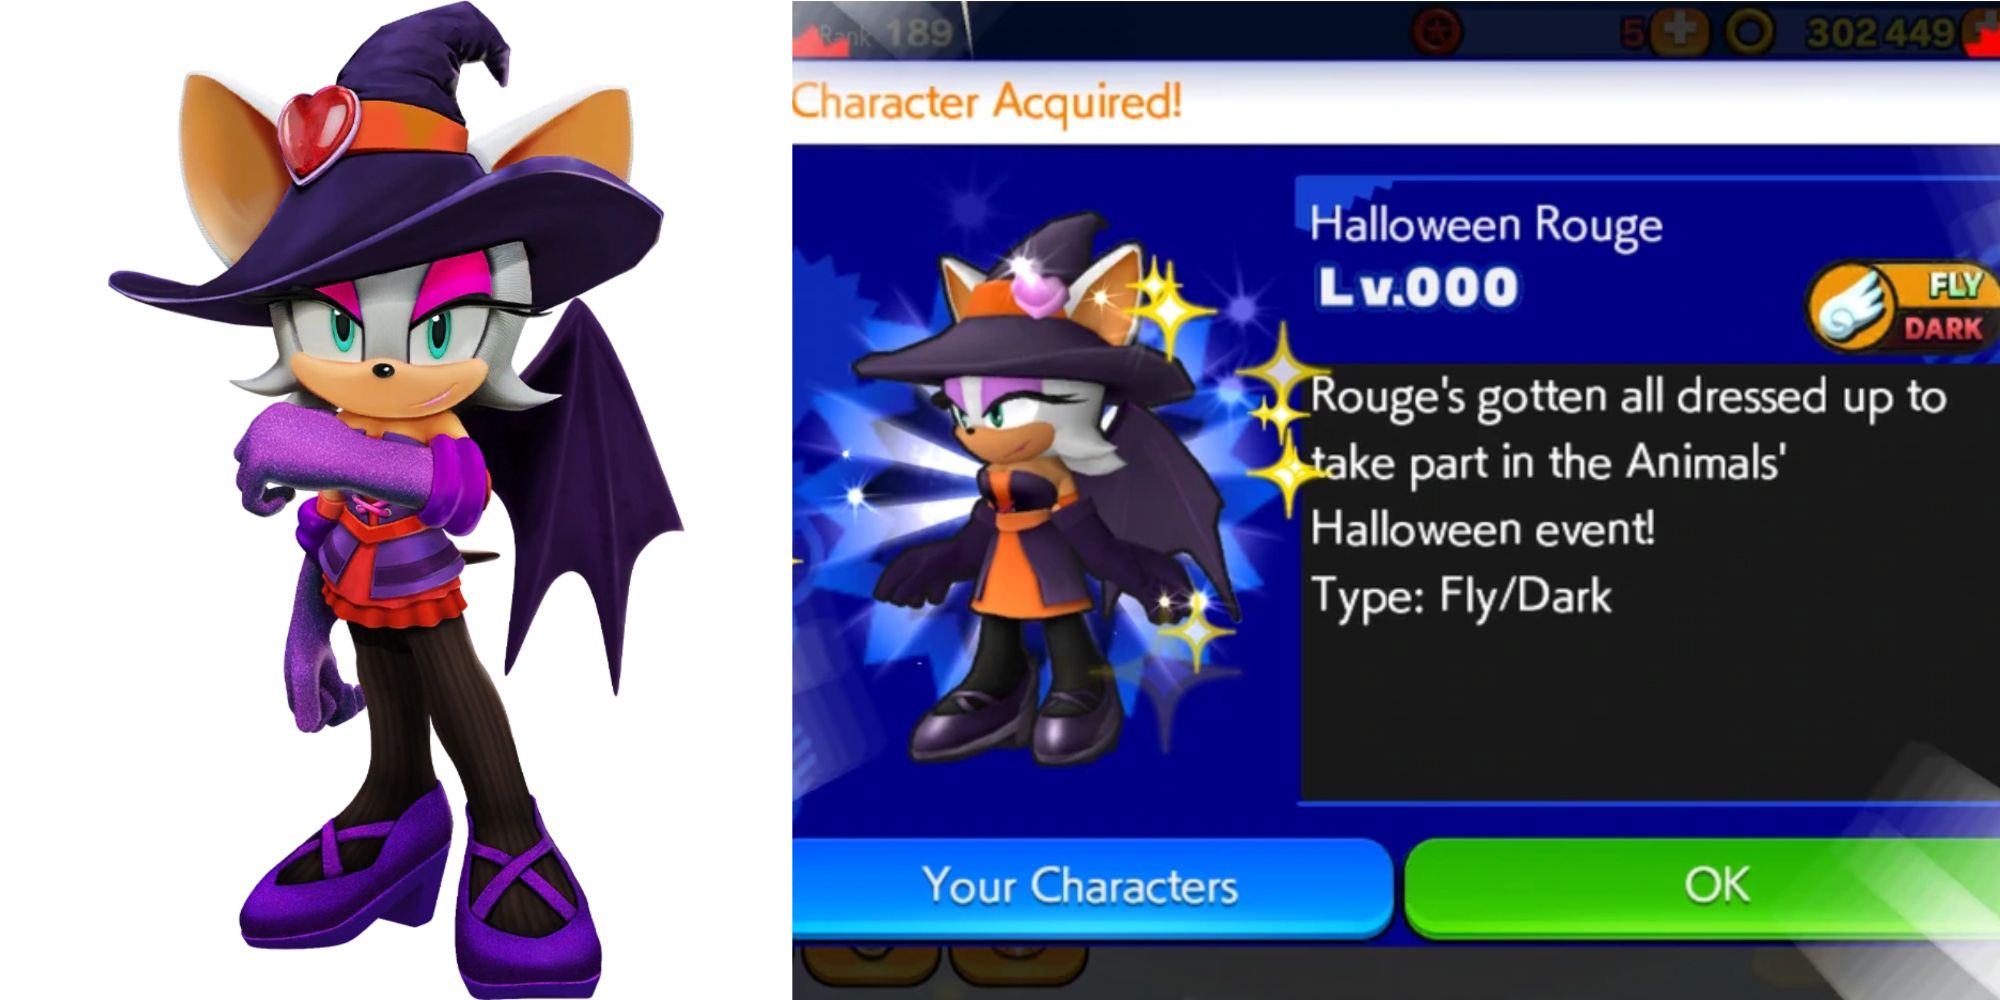 Sonic Halloween Witch Rouge the Bat